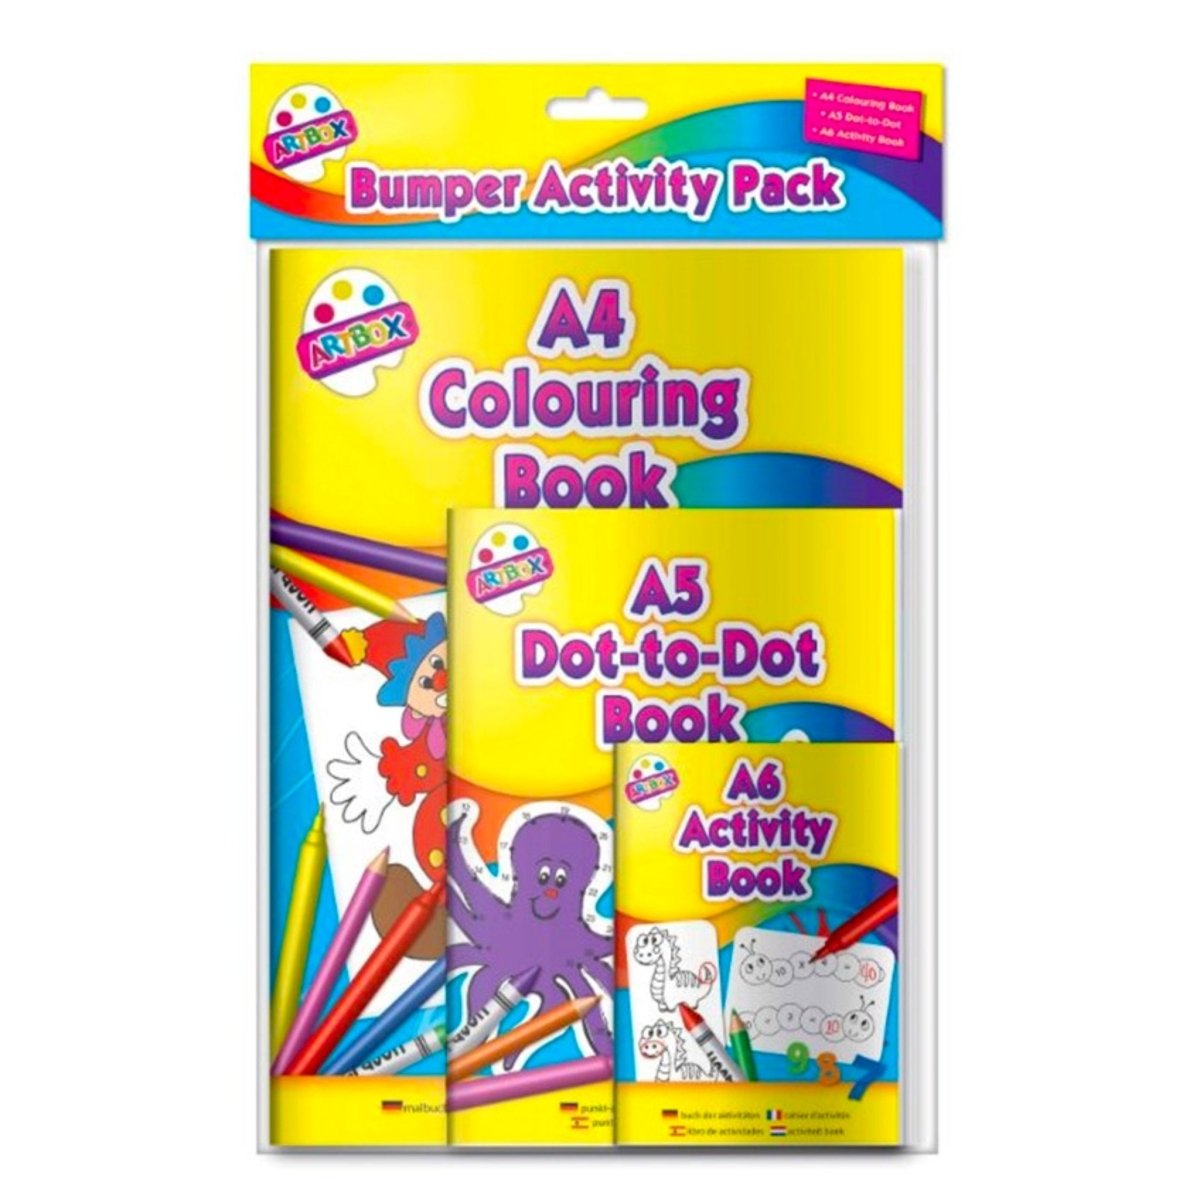 Bumper Activity Pack (Contains 3 Books) - Kids Party Craft